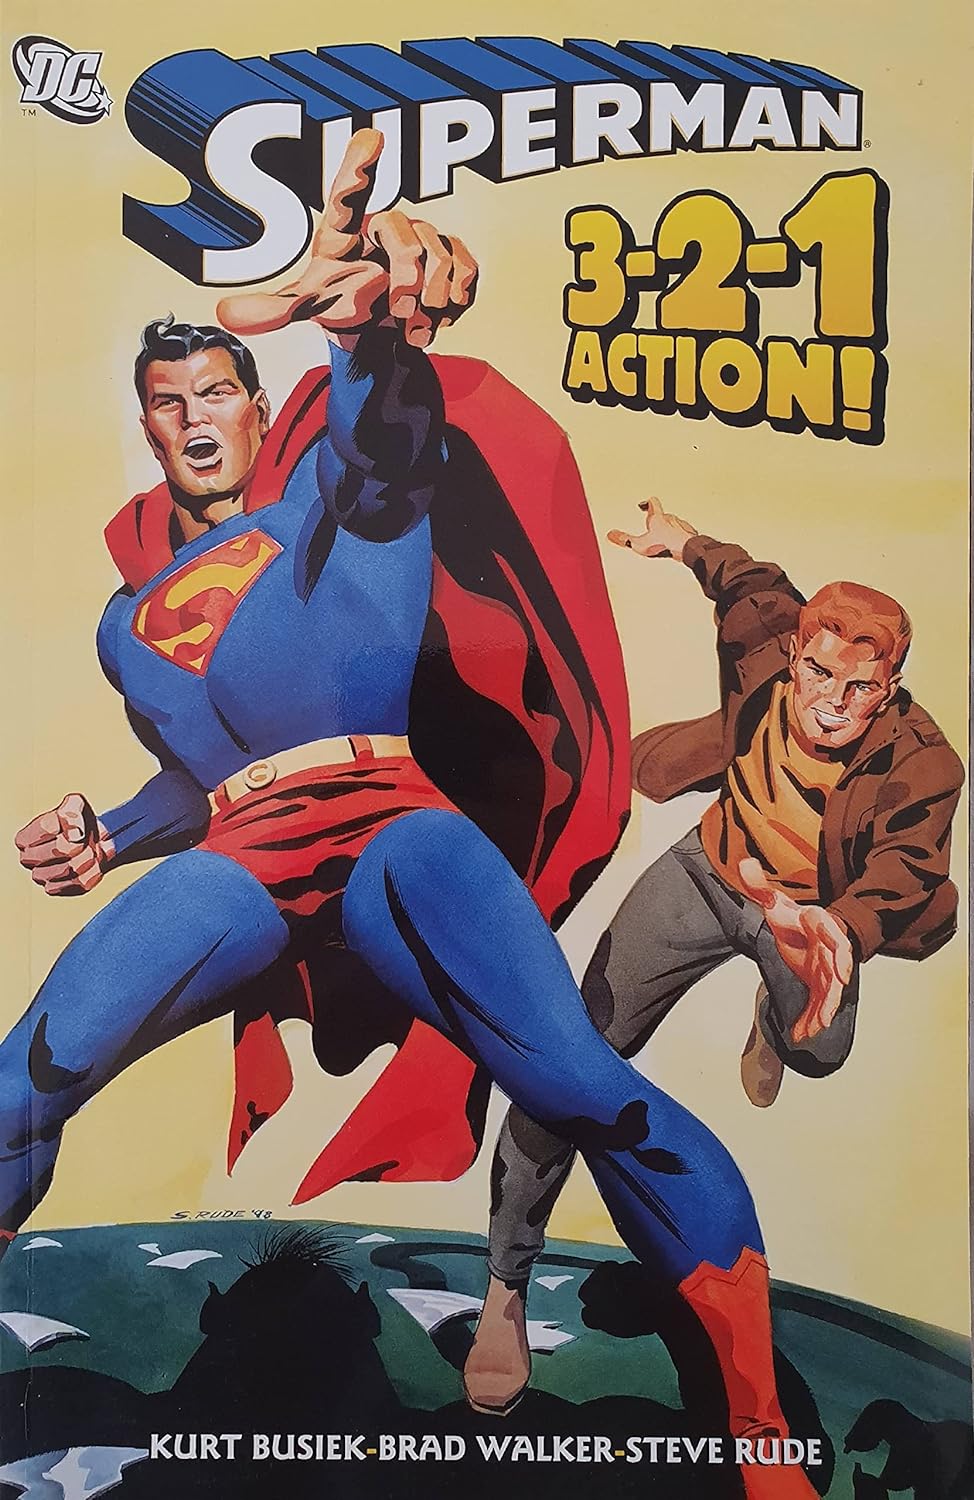 Cover image of Superman: 3-2-1 Action